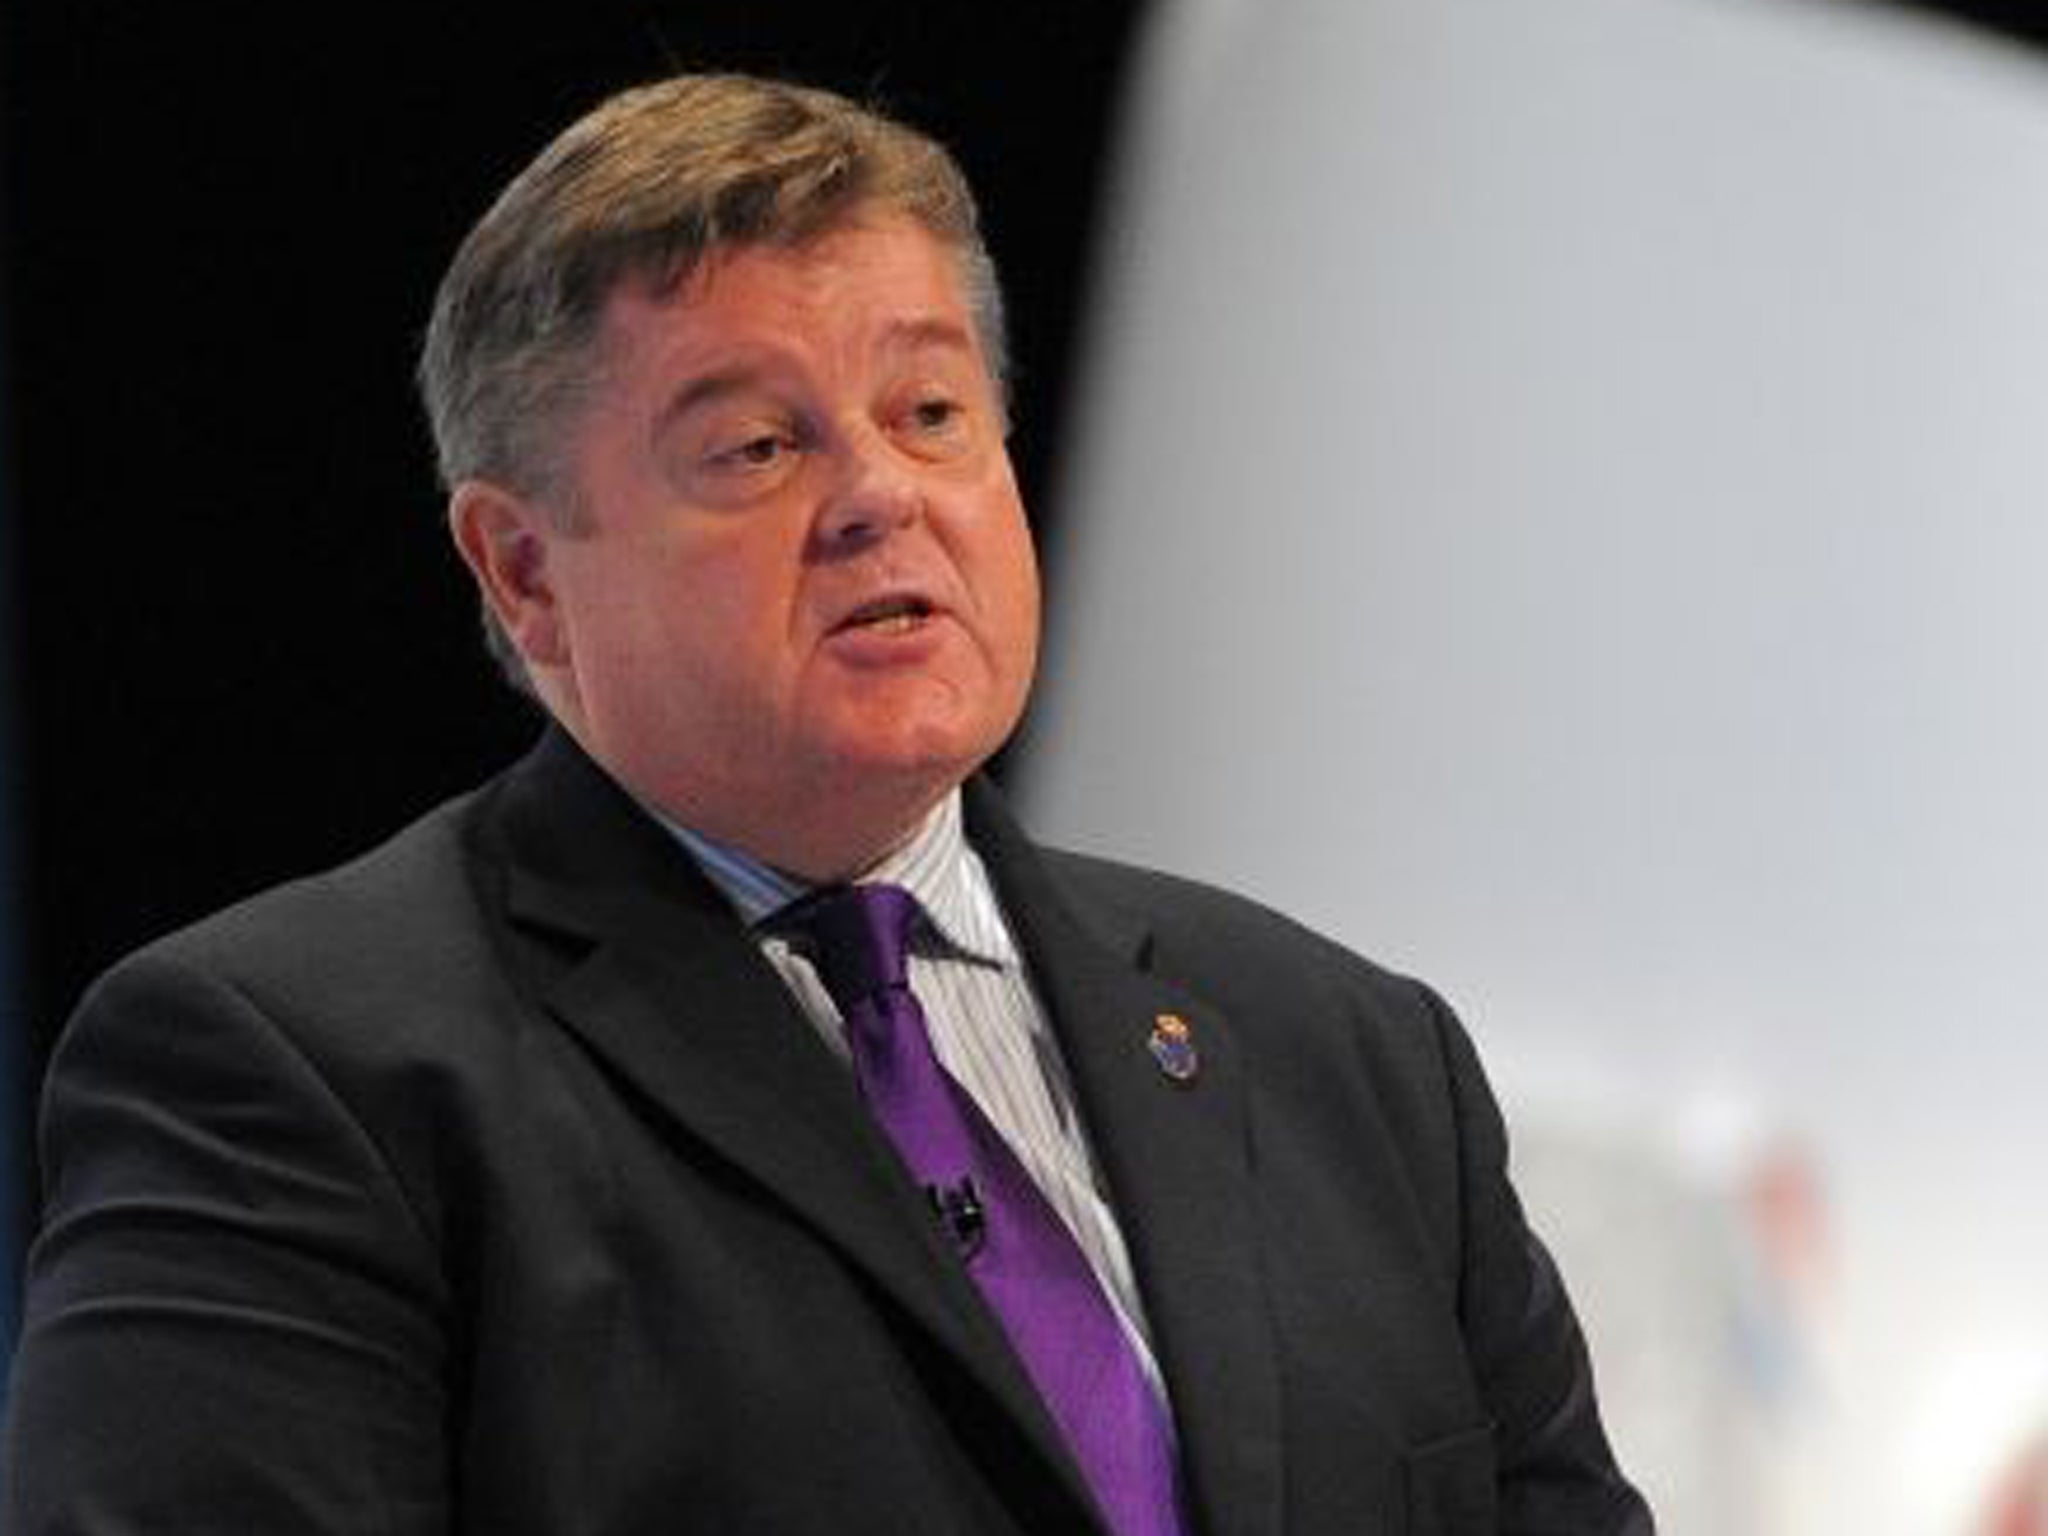 Paul McKeever at the Labour Party conference in 2011